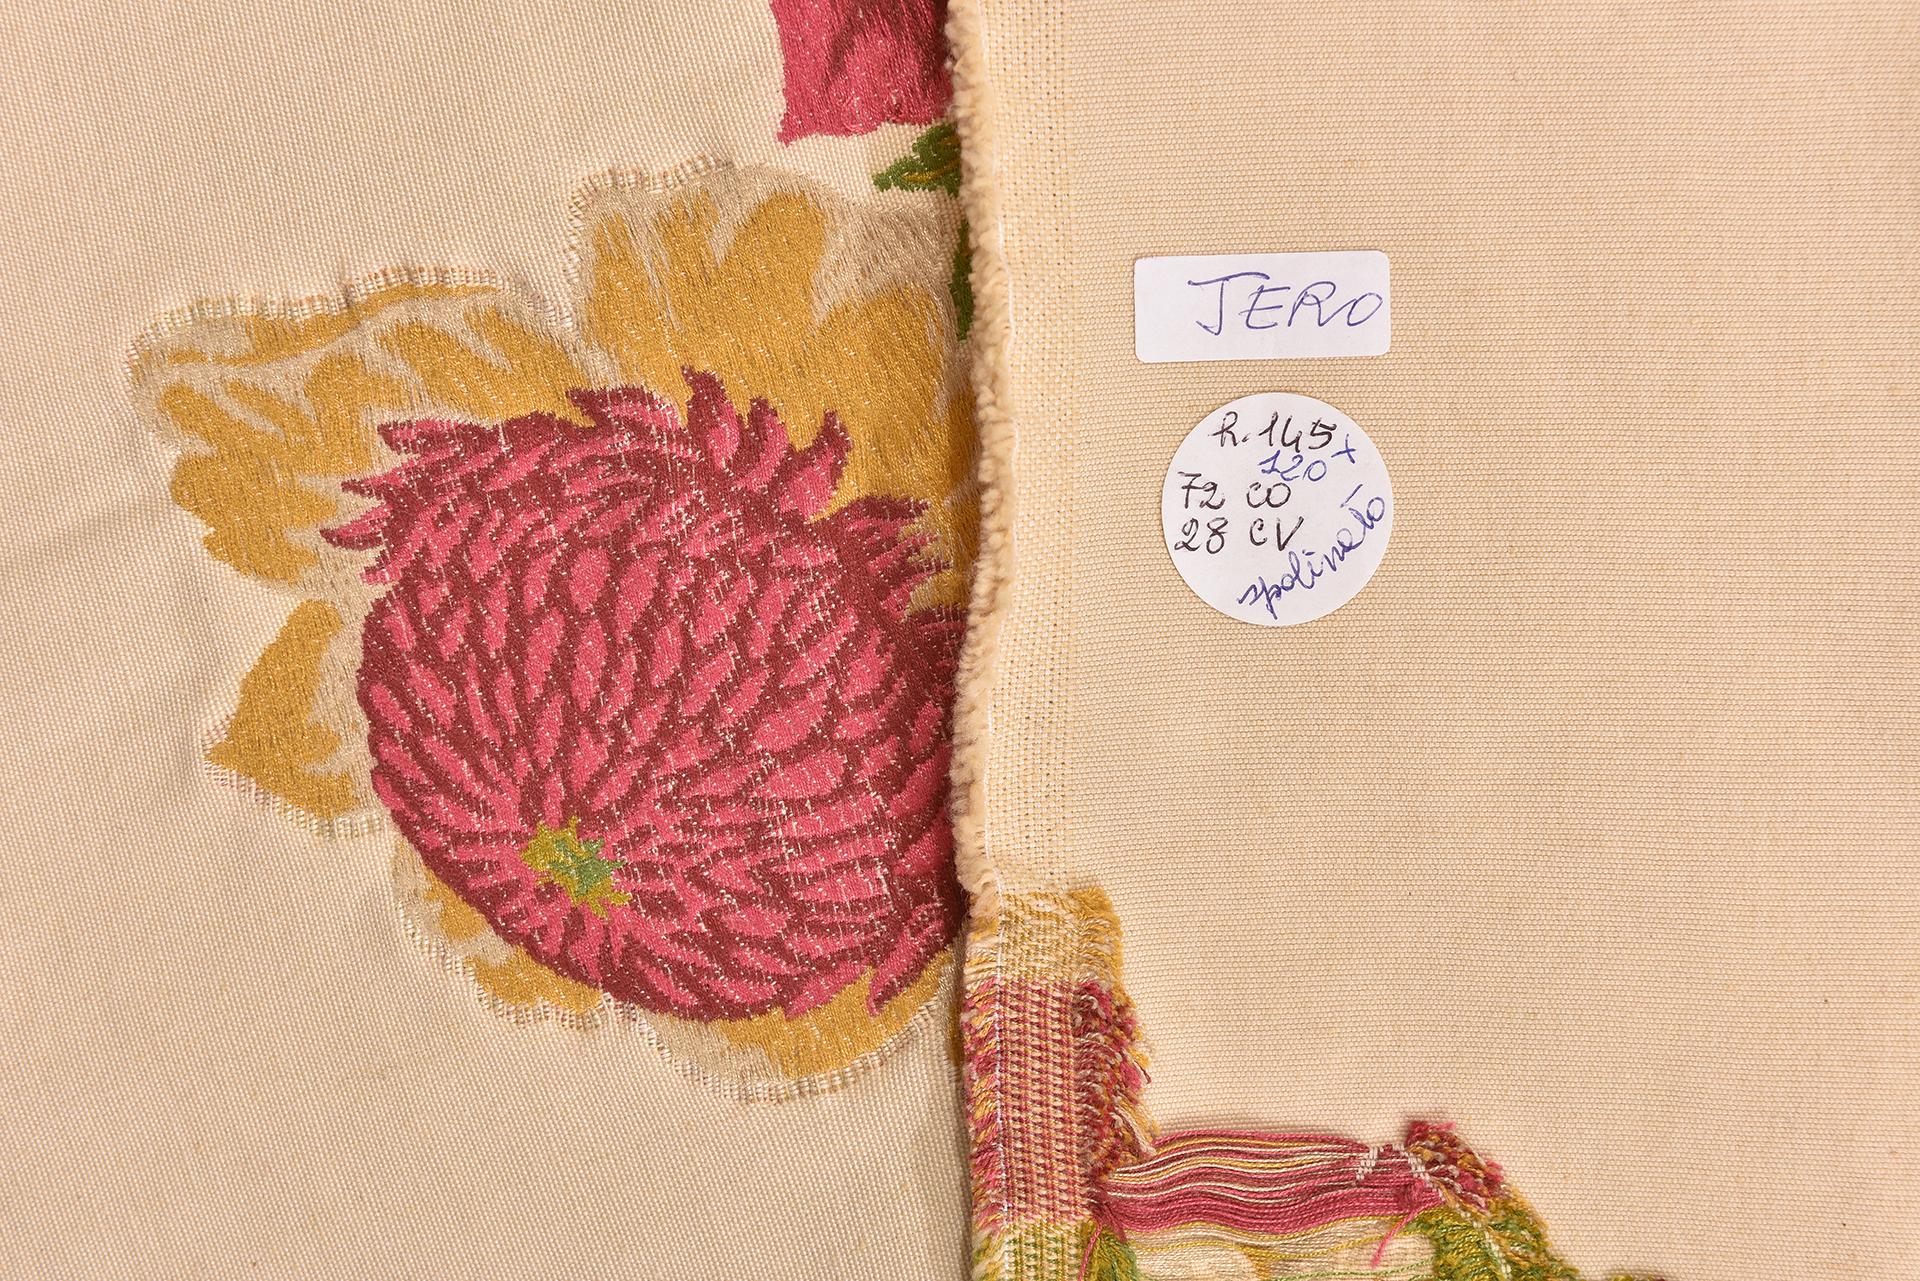 Bobbin remnant  fabric with flowes in relief by French JERO: 72% cotton and 28% CV.
For an armchair: to be completed with a plain colored fabric.
I Accept OFFER.